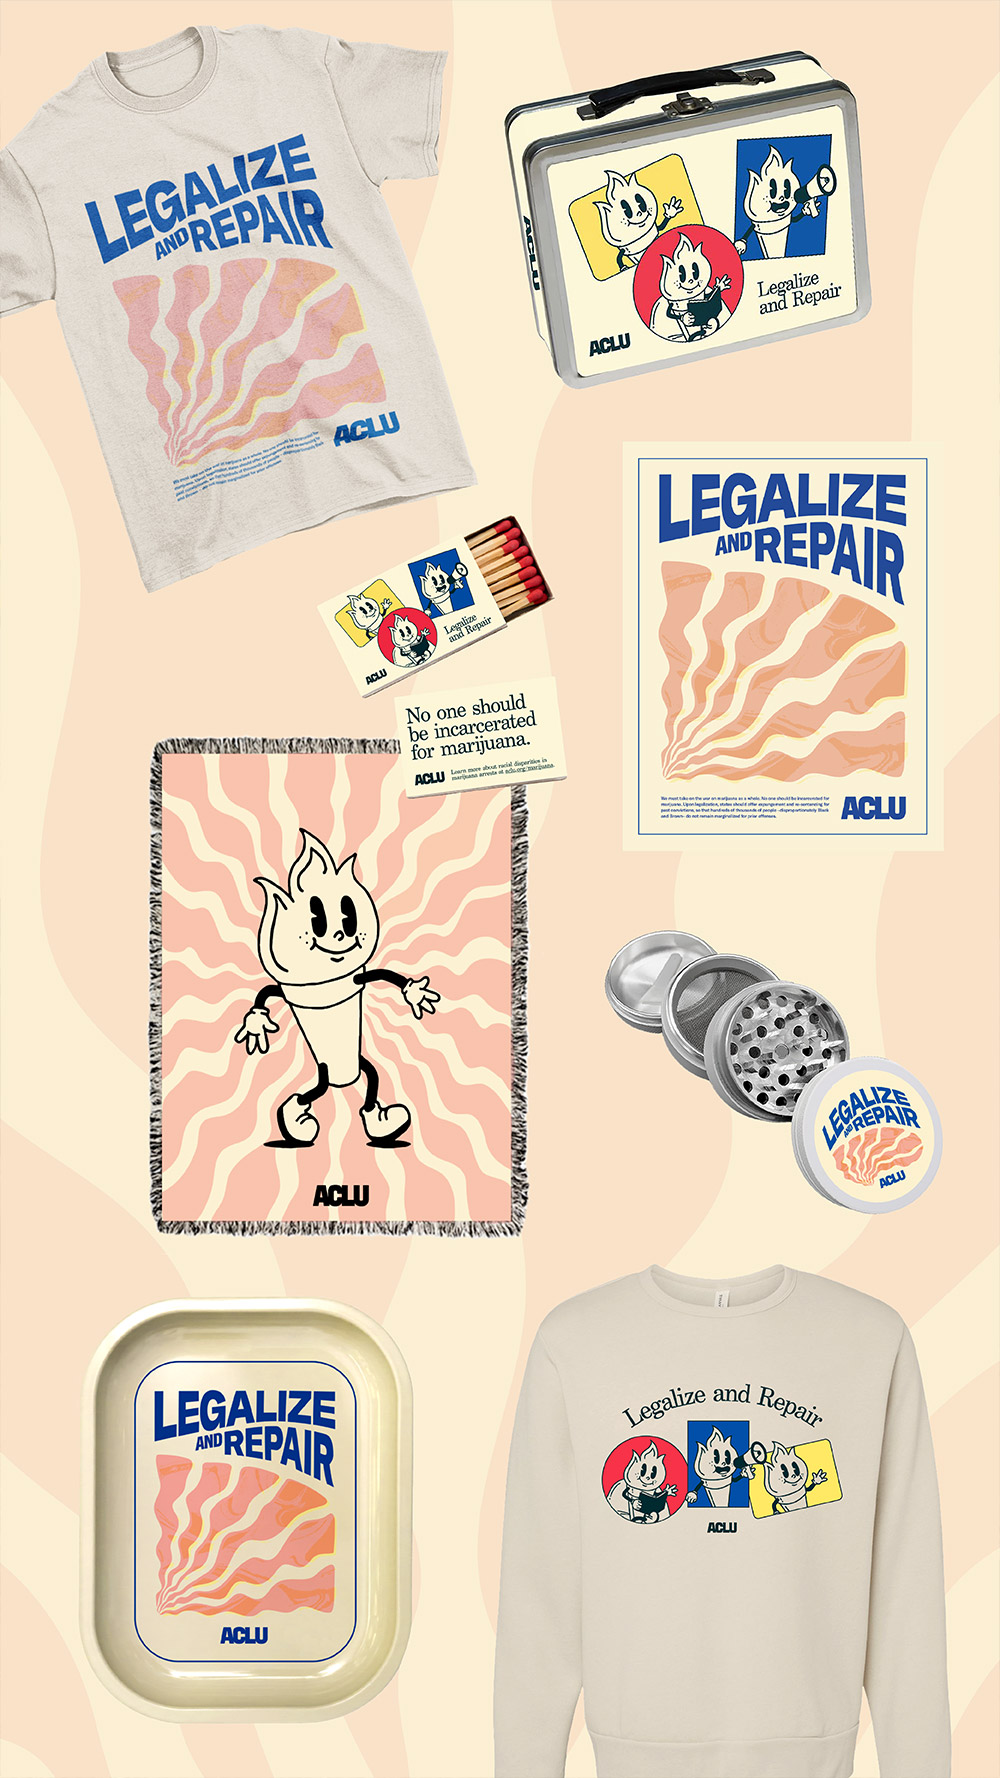 A collage-style image featuring new ϰſ 420 products.